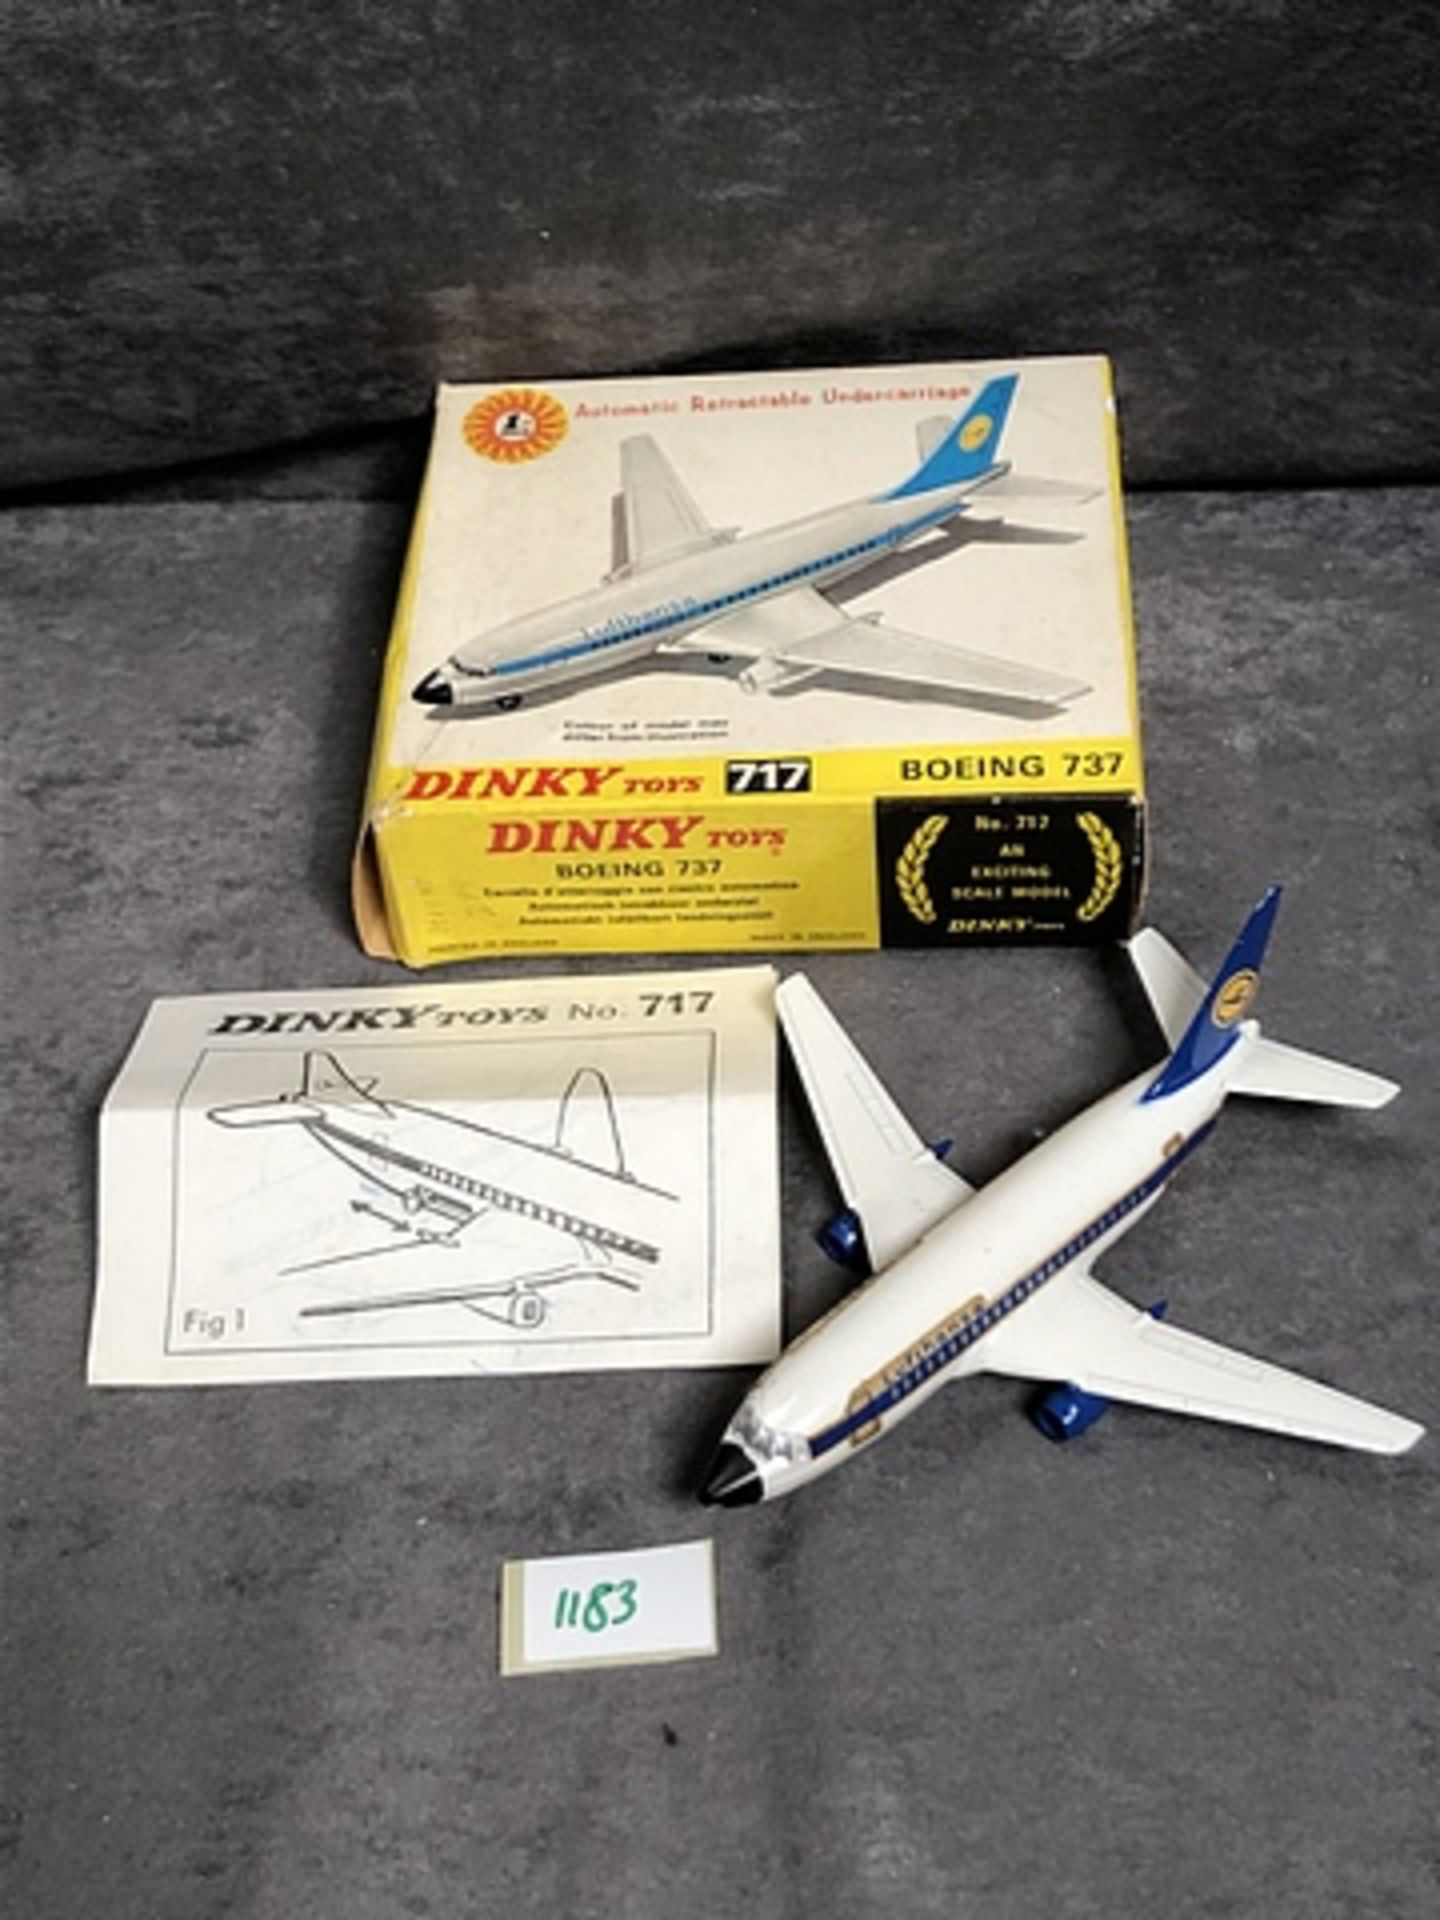 Dinky Toys Diecast #717 Boeing 737 With Automatic Retractable Undercarriage Model is in Mint - Image 3 of 3